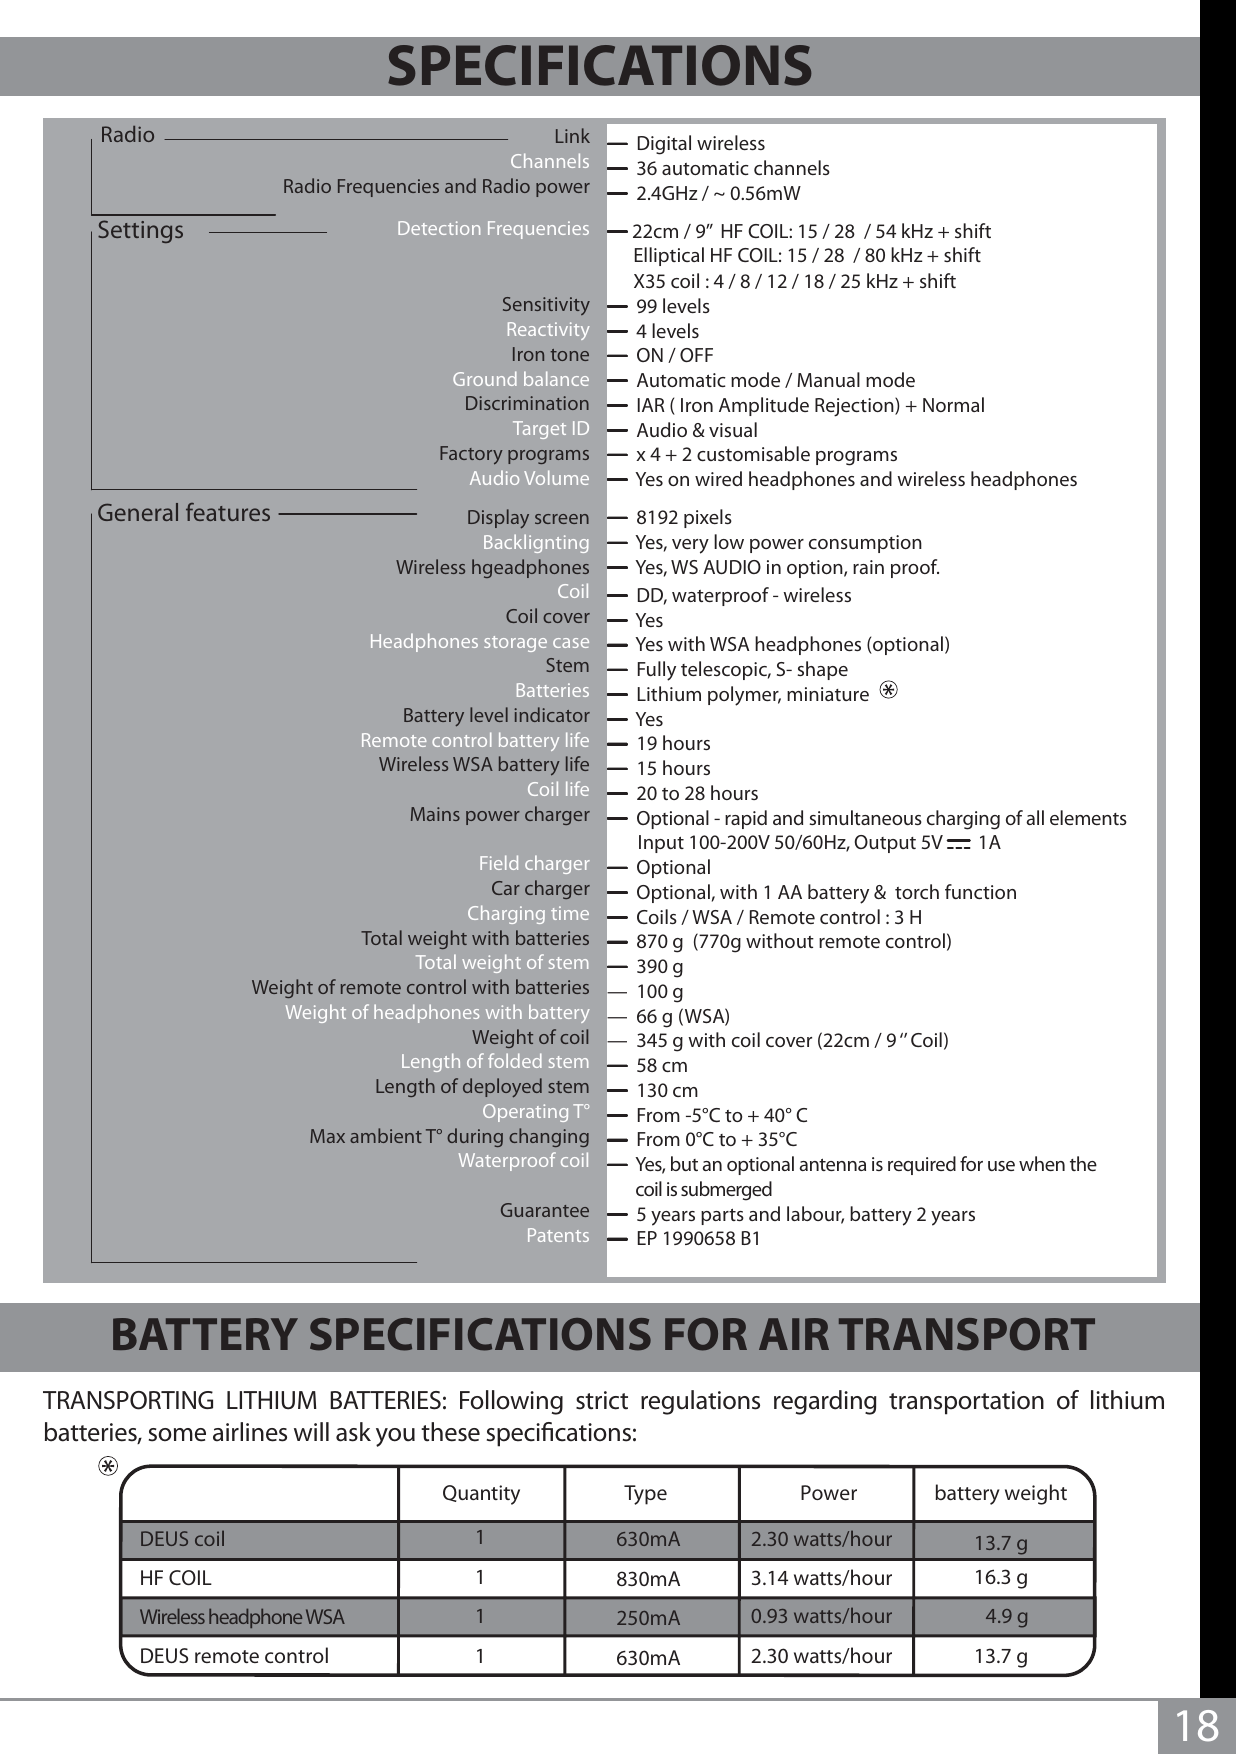 18RadioSettingsBATTERY SPECIFICATIONS FOR AIR TRANSPORTTRANSPORTING LITHIUM BATTERIES: Following strict regulations regarding transportation of lithium batteries, some airlines will ask you these specications:  Digital wireless  36 automatic channels  2.4GHz / ~ 0.56mW 22cm / 9’’  HF COIL: 15 / 28  / 54 kHz + shift        Elliptical HF COIL: 15 / 28  / 80 kHz + shift         X35 coil : 4 / 8 / 12 / 18 / 25 kHz + shift   99 levels  4 levels  ON / OFF  Automatic mode / Manual mode  IAR ( Iron Amplitude Rejection) + Normal  Audio &amp; visual  x 4 + 2 customisable programs  Yes on wired headphones and wireless headphones  8192 pixels  Yes, very low power consumption  Yes, WS AUDIO in option, rain proof.  DD, waterproof - wireless  Yes  Yes with WSA headphones (optional)  Fully telescopic, S- shape  Lithium polymer, miniature     Yes  19 hours  15 hours  20 to 28 hours  Optional - rapid and simultaneous charging of all elements           Input 100-200V 50/60Hz, Output 5V        1A         Optional   Optional, with 1 AA battery &amp;  torch function  Coils / WSA / Remote control : 3 H   870 g  (770g without remote control)  390 g—  100 g—  66 g (WSA)—  345 g with coil cover (22cm / 9 ‘’ Coil)  58 cm  130 cm  From -5°C to + 40° C  From 0°C to + 35°C  Yes, but an optional antenna is required for use when the          coil is submerged    5 years parts and labour, battery 2 years  EP 1990658 B1General featuresSPECIFICATIONS Quantity Type Power battery weightDEUS coil 1630mA 2.30 watts/hour 13.7 gHF COIL 1830mA 3.14 watts/hour 16.3 g1250mA 0.93 watts/hour   4.9 gDEUS remote control 1630mA 2.30 watts/hour 13.7 gWireless headphone WSALinkChannels Radio Frequencies and Radio powerDetection FrequenciesSensitivityReactivityIron toneGround balanceDiscriminationTarget IDFactory programsAudio VolumeDisplay screenBackligntingWireless hgeadphones CoilCoil coverHeadphones storage case StemBatteriesBattery level indicatorRemote control battery lifeWireless WSA battery life Coil lifeMains power chargerField chargerCar chargerCharging timeTotal weight with batteries Total weight of stem Weight of remote control with batteriesWeight of headphones with battery Weight of coilLength of folded stem Length of deployed stem Operating T° Max ambient T° during changing Waterproof coilGuaranteePatents